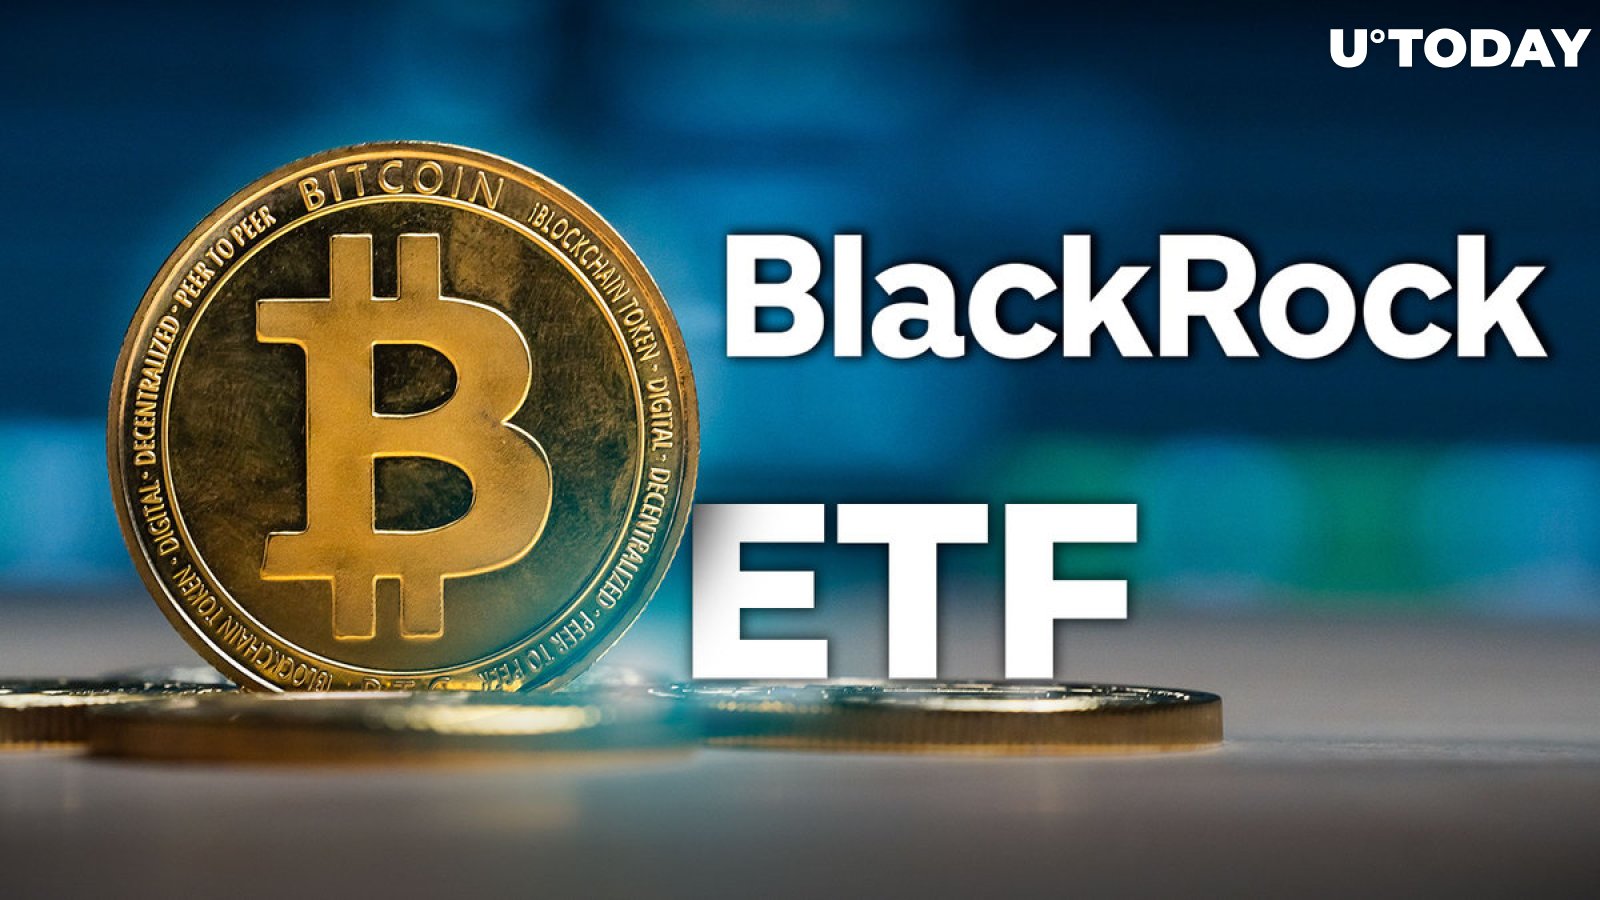 BlackRock's Bitcoin ETF Enters Top 5 Ranking for Year